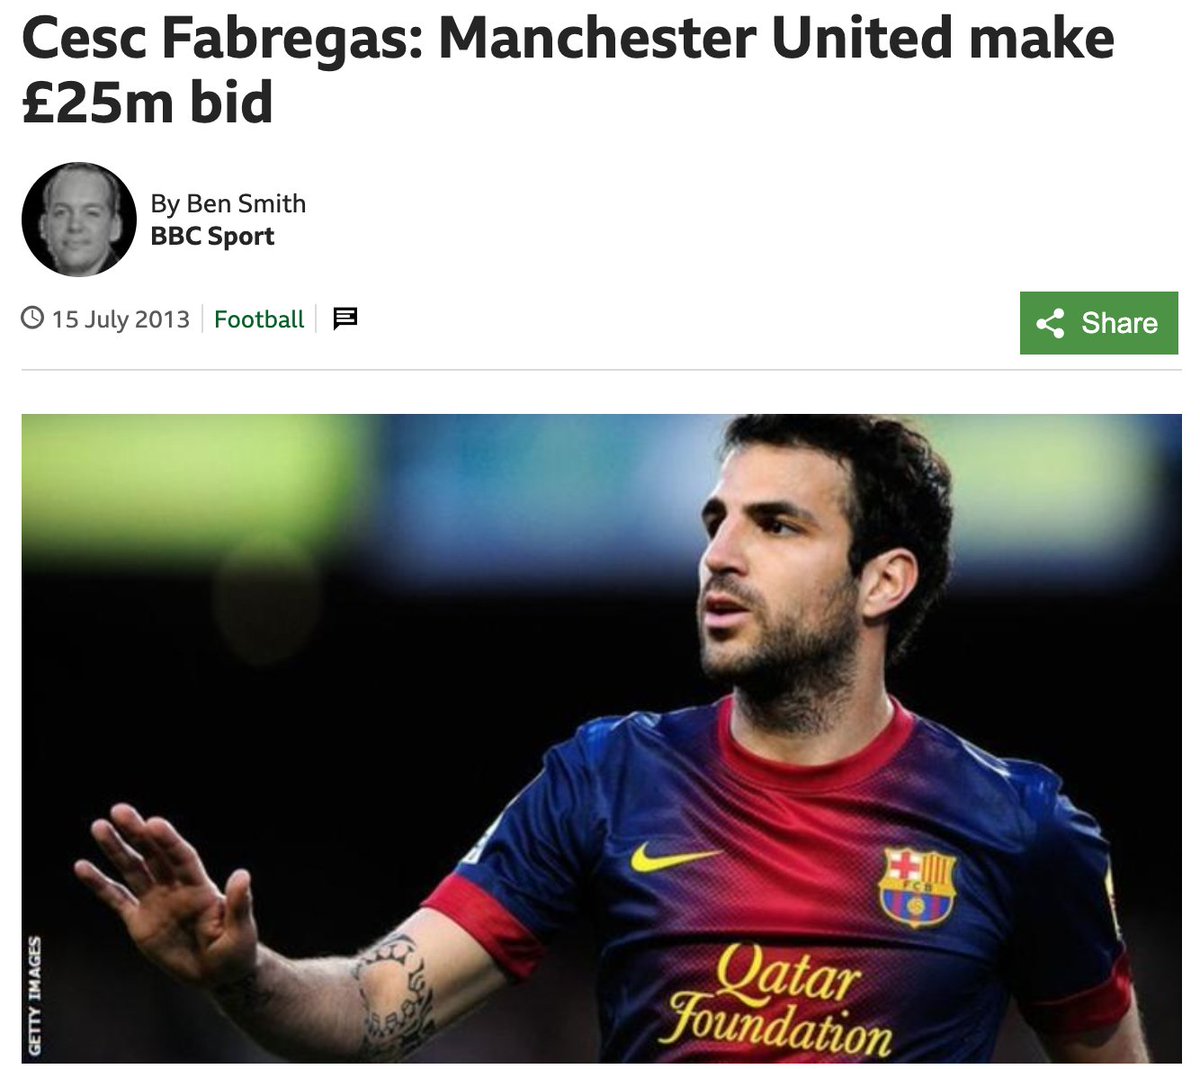 The very next day, United offered Barcelona £25m for Fabregas which was rejected. Having just sold his understudy in Thiago, the chances of now selling Fabregas too were slim to none. A week later we increased the offer to £30m, unsurprisingly that was rejected too.